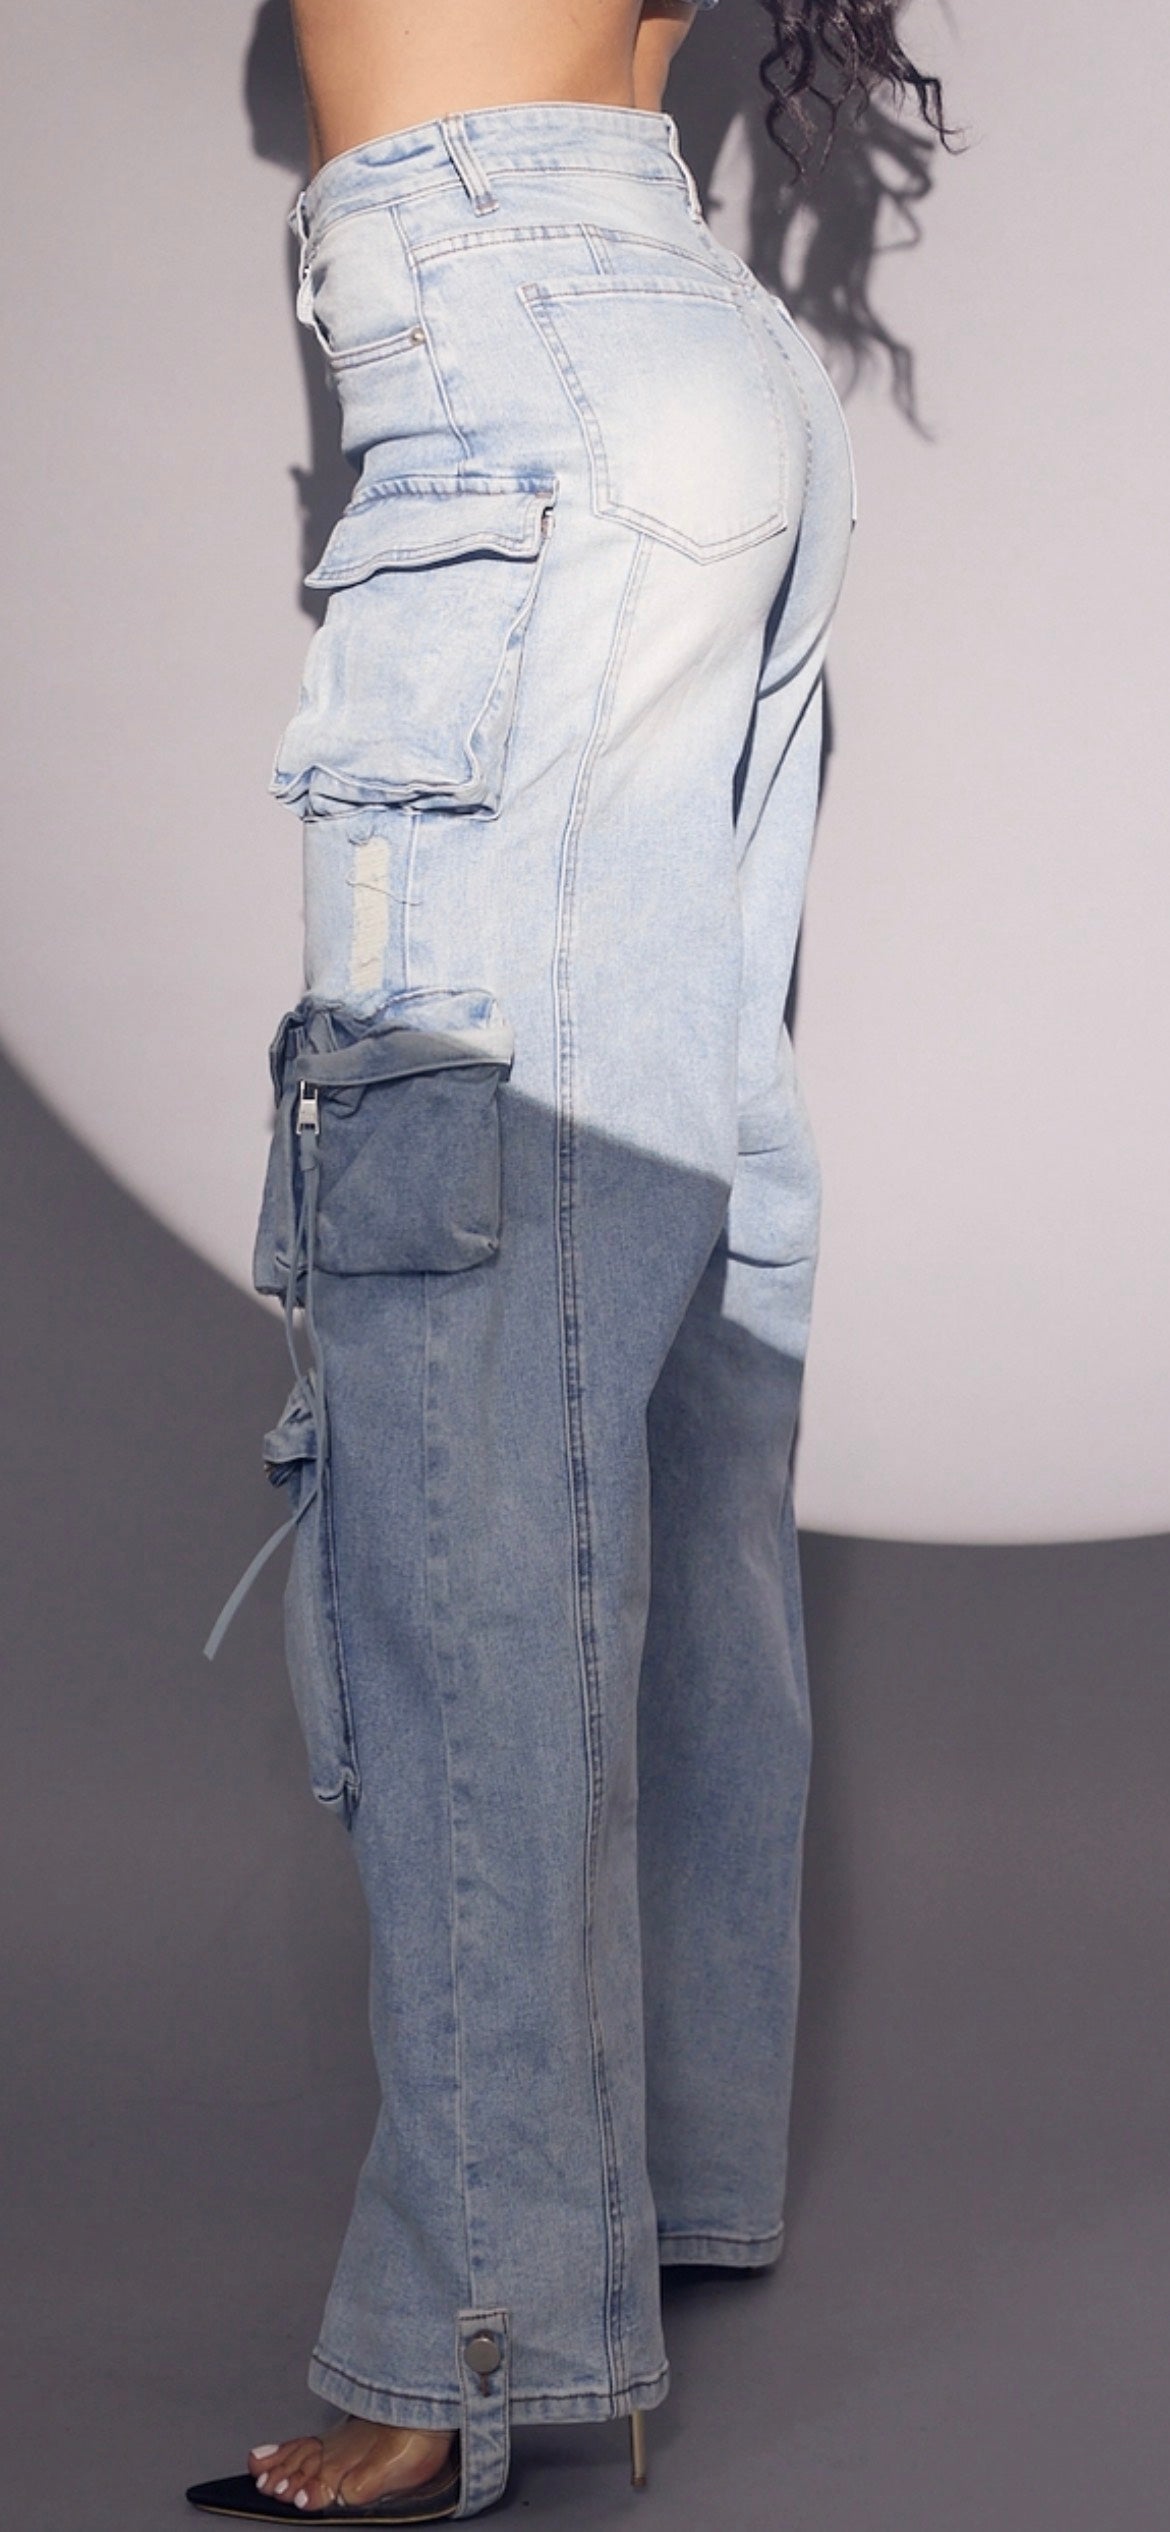 Washed blue cargo jeans for women